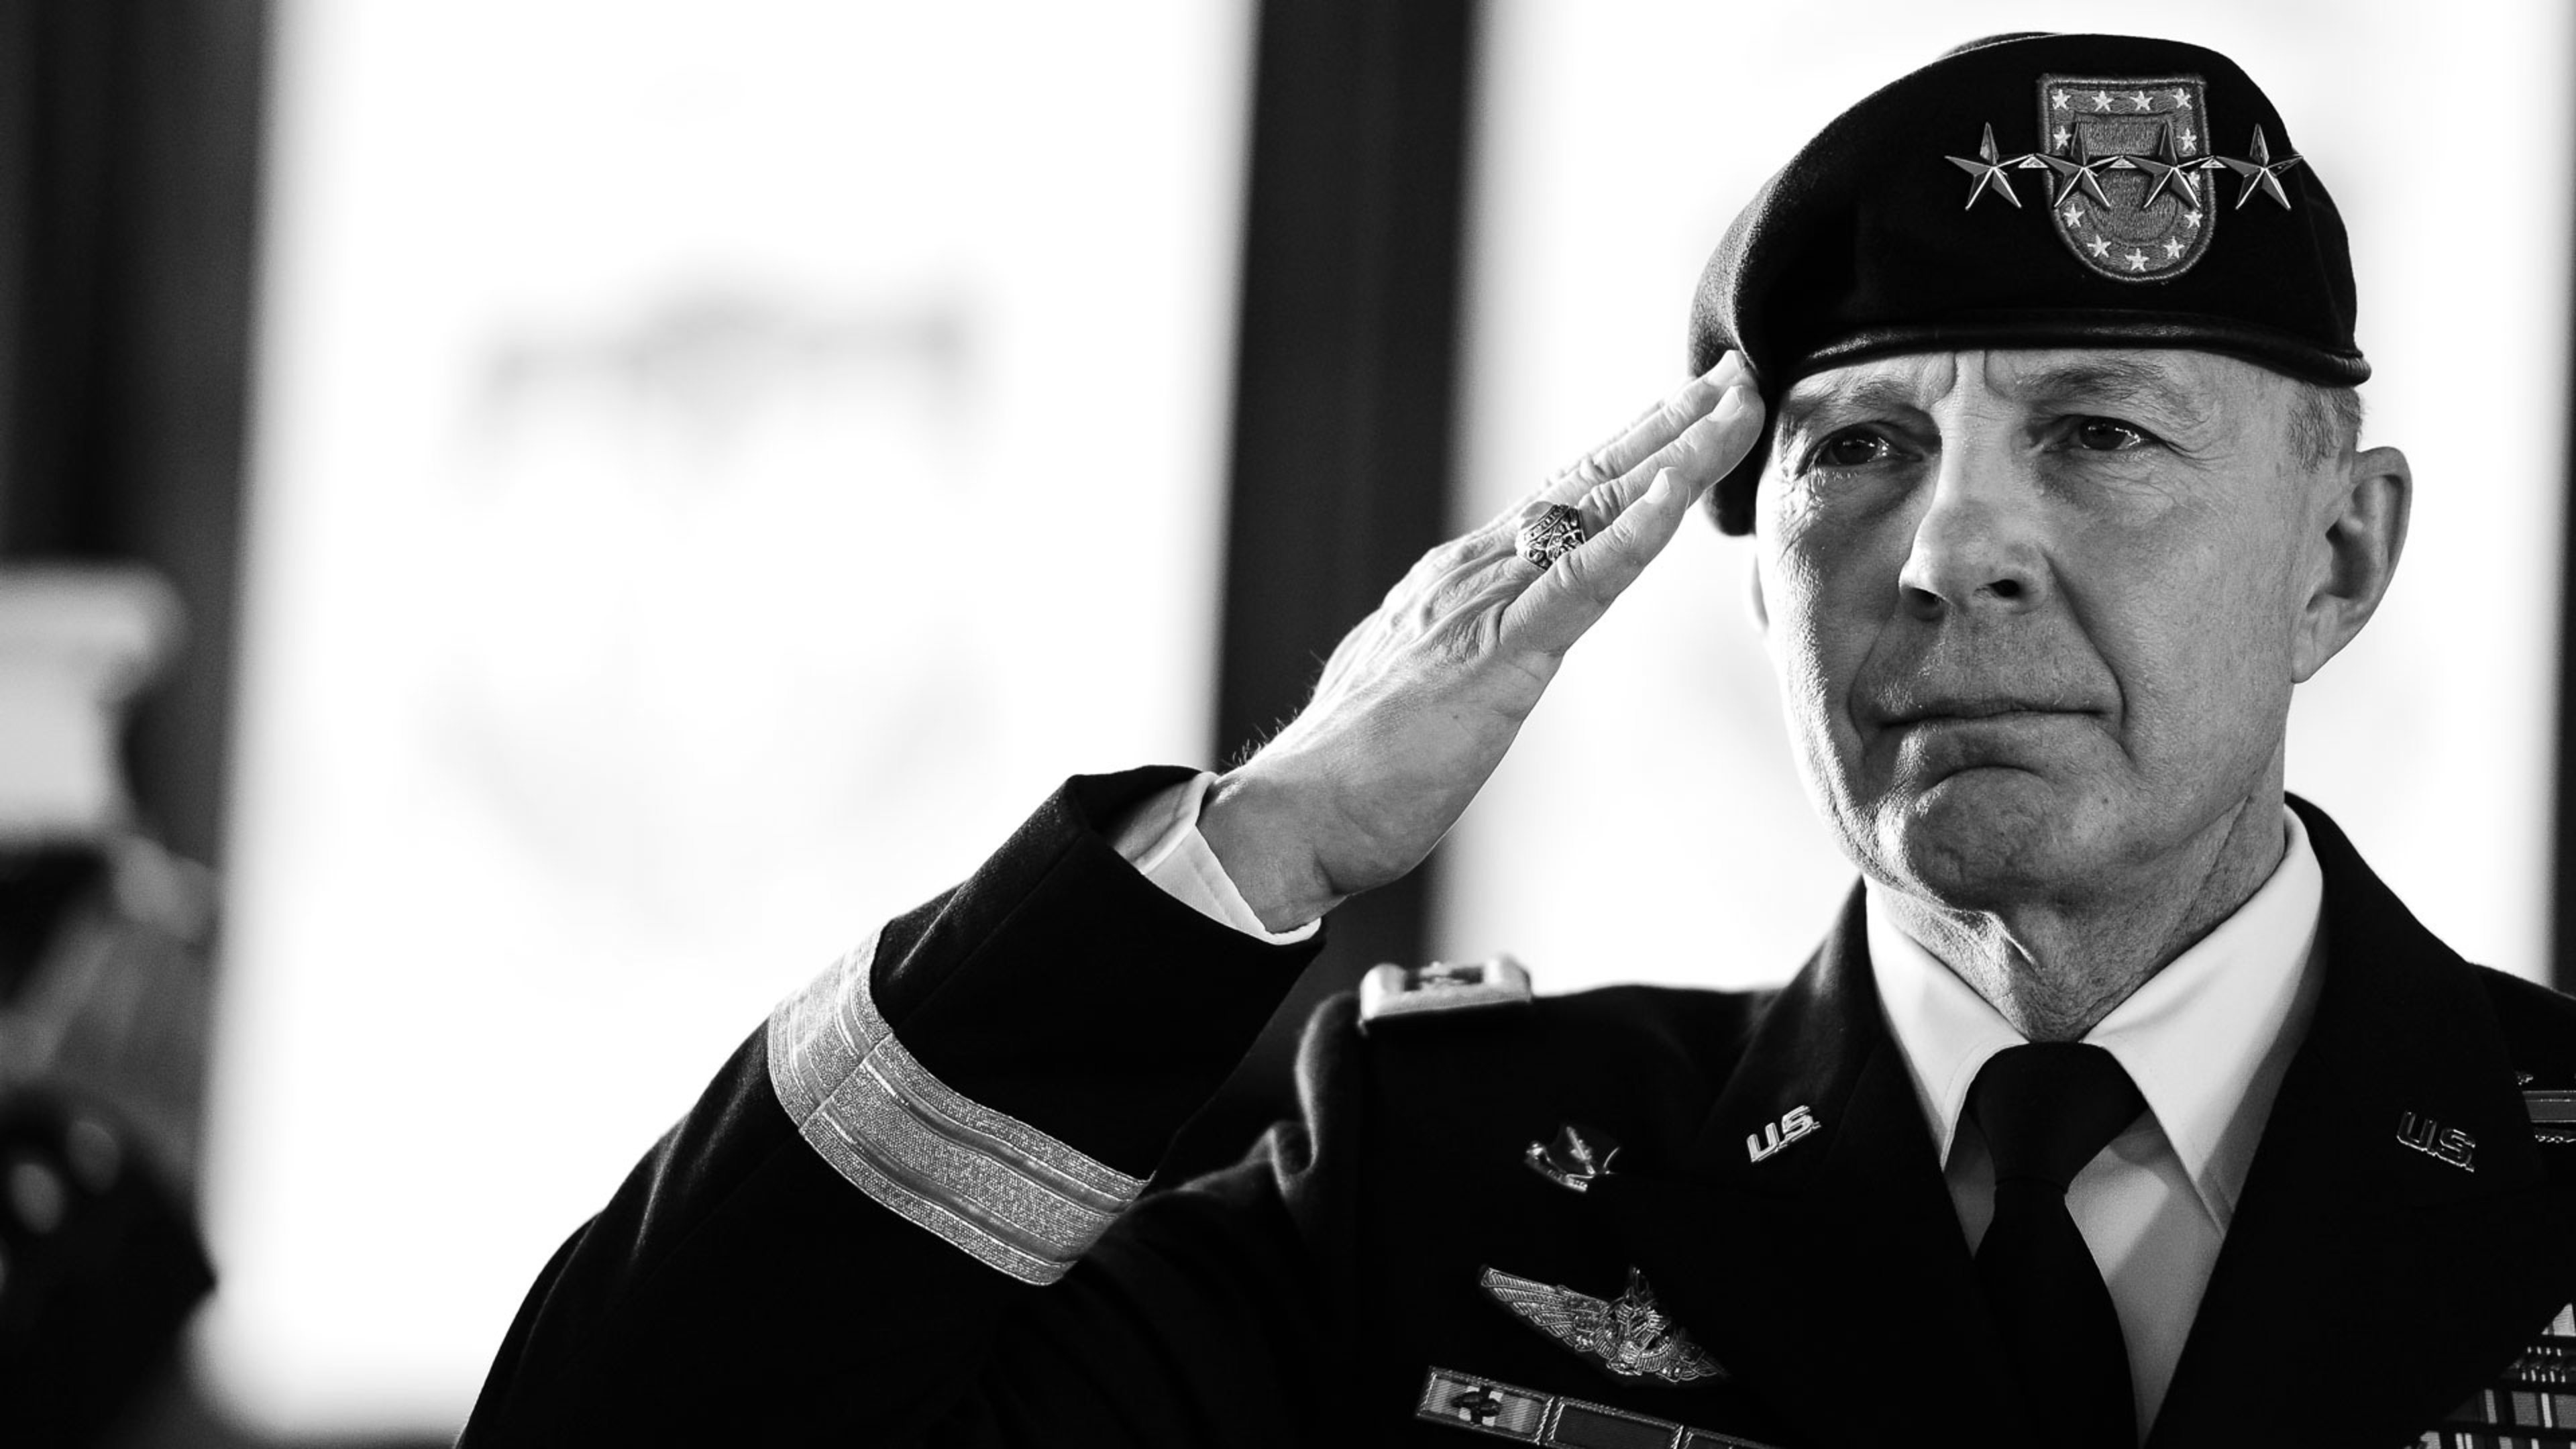 How to make decisions like a U.S. general